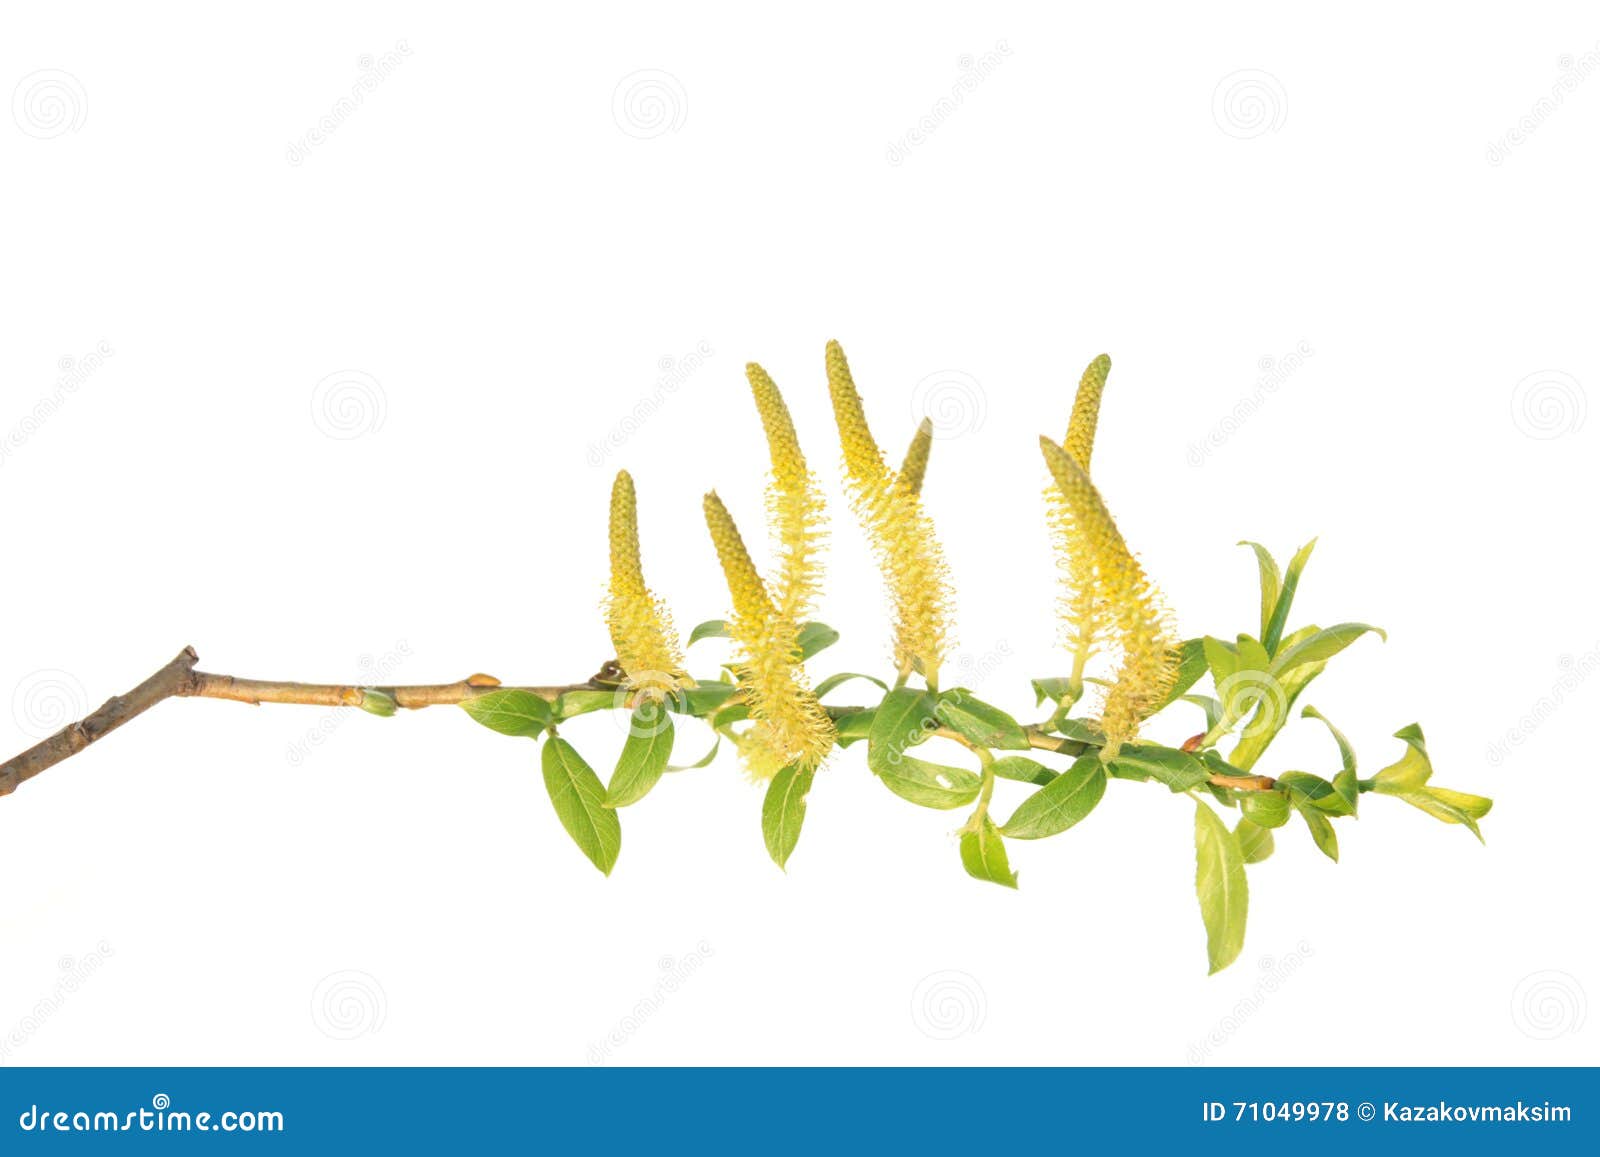 branch of white willow (salix alba) with catkins  on white